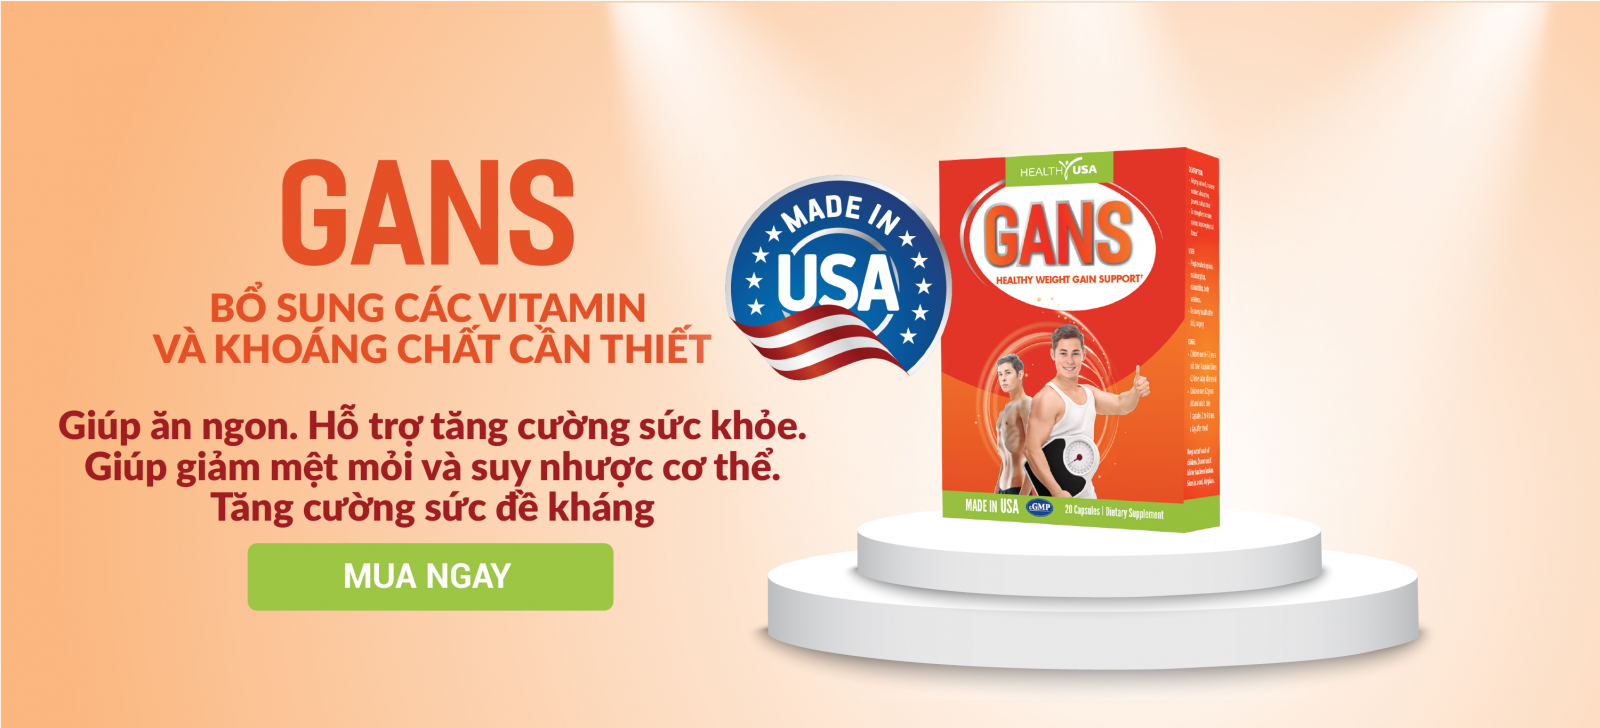 Công Dụng HEALTHY USA GANS Healthy Weight Gain Support: